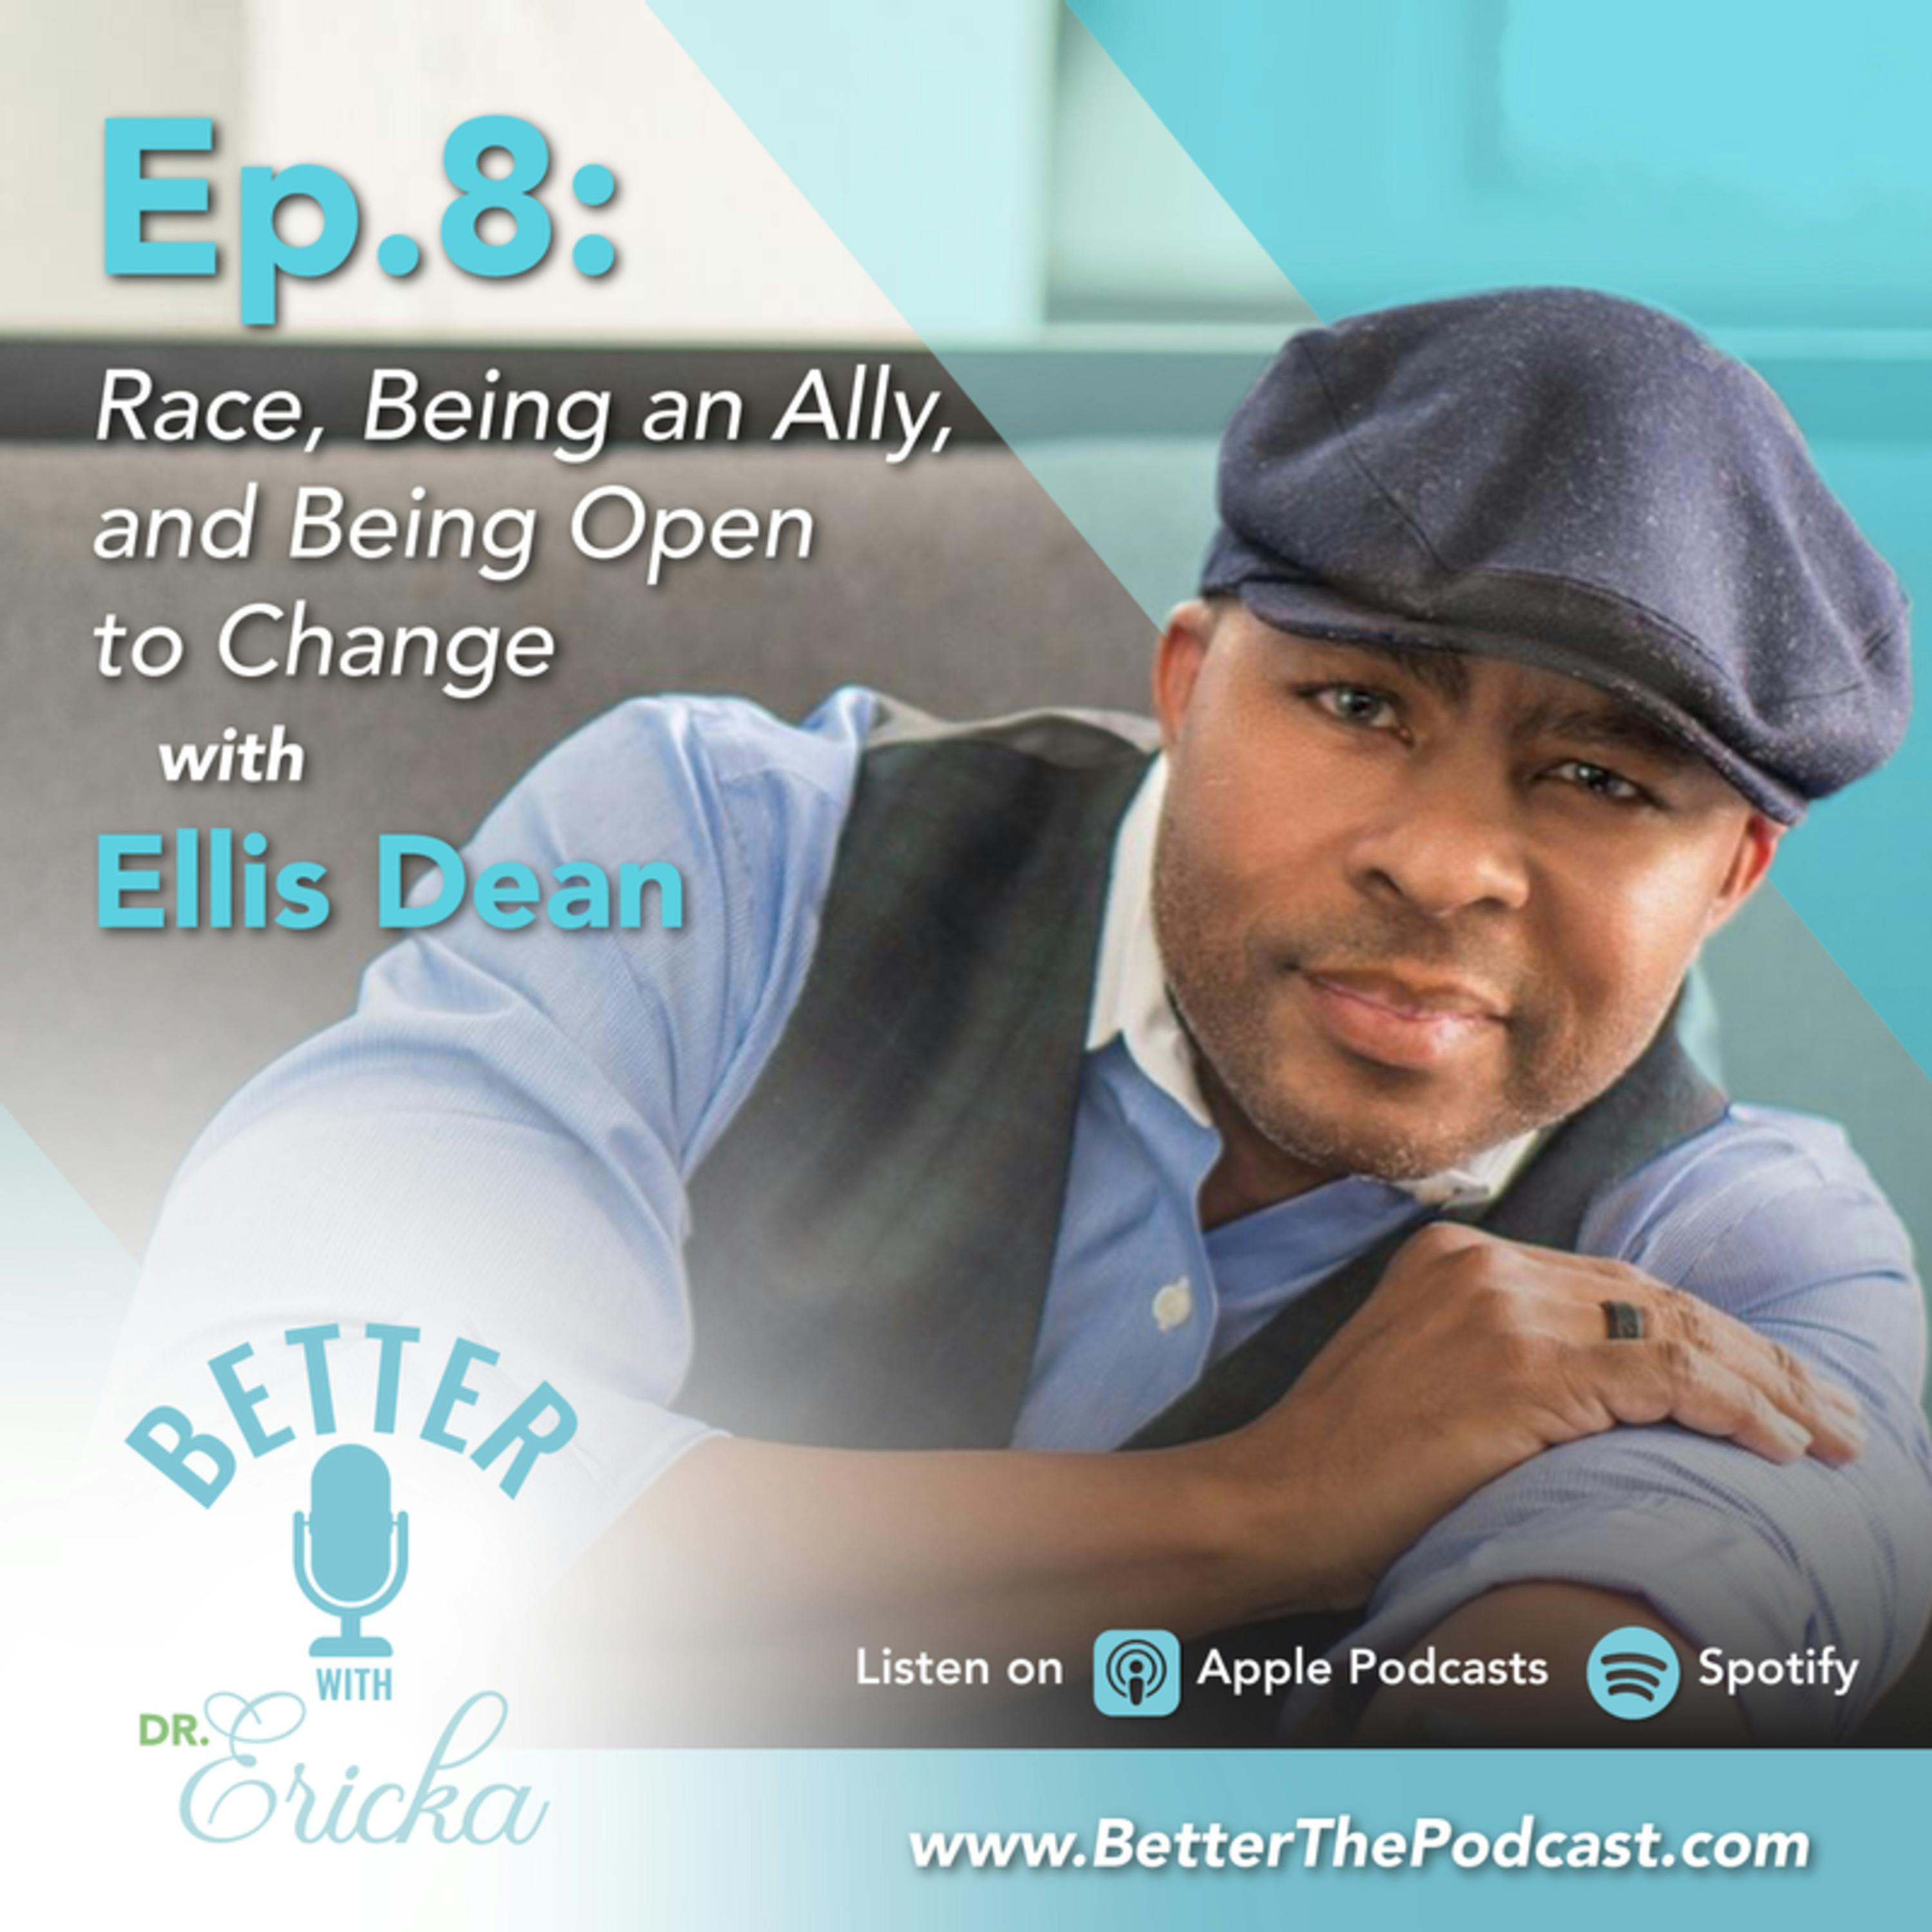 Race, Being an Ally, and Being Open to Change with Ellis Dean